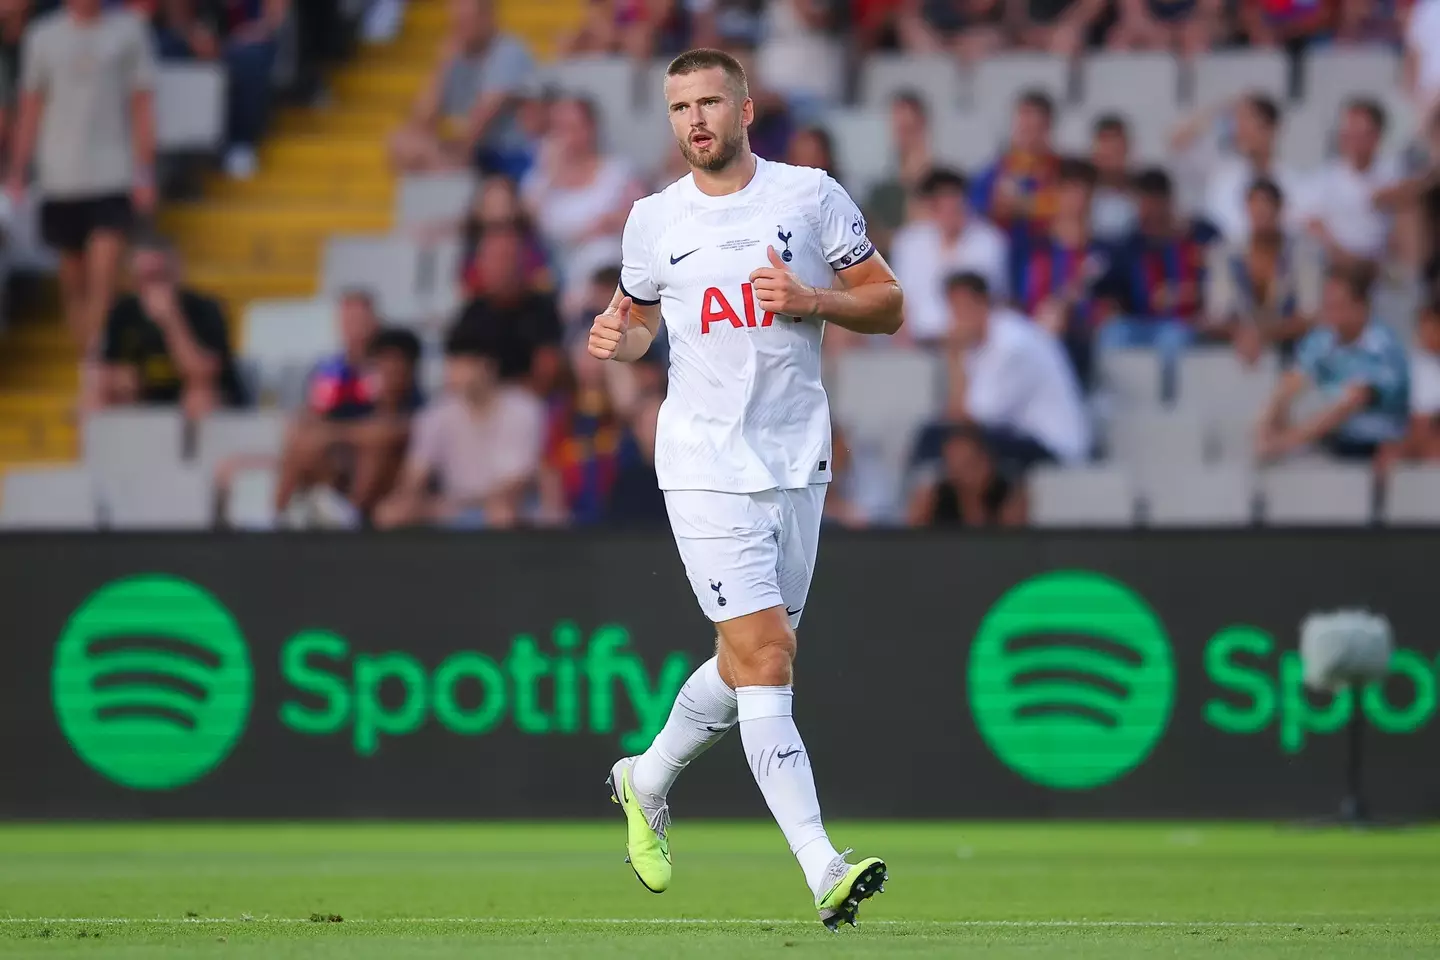 Eric Dier was a part of Spurs' pre-season squad, but looks out of favour under new manager Ange Postecoglou. (